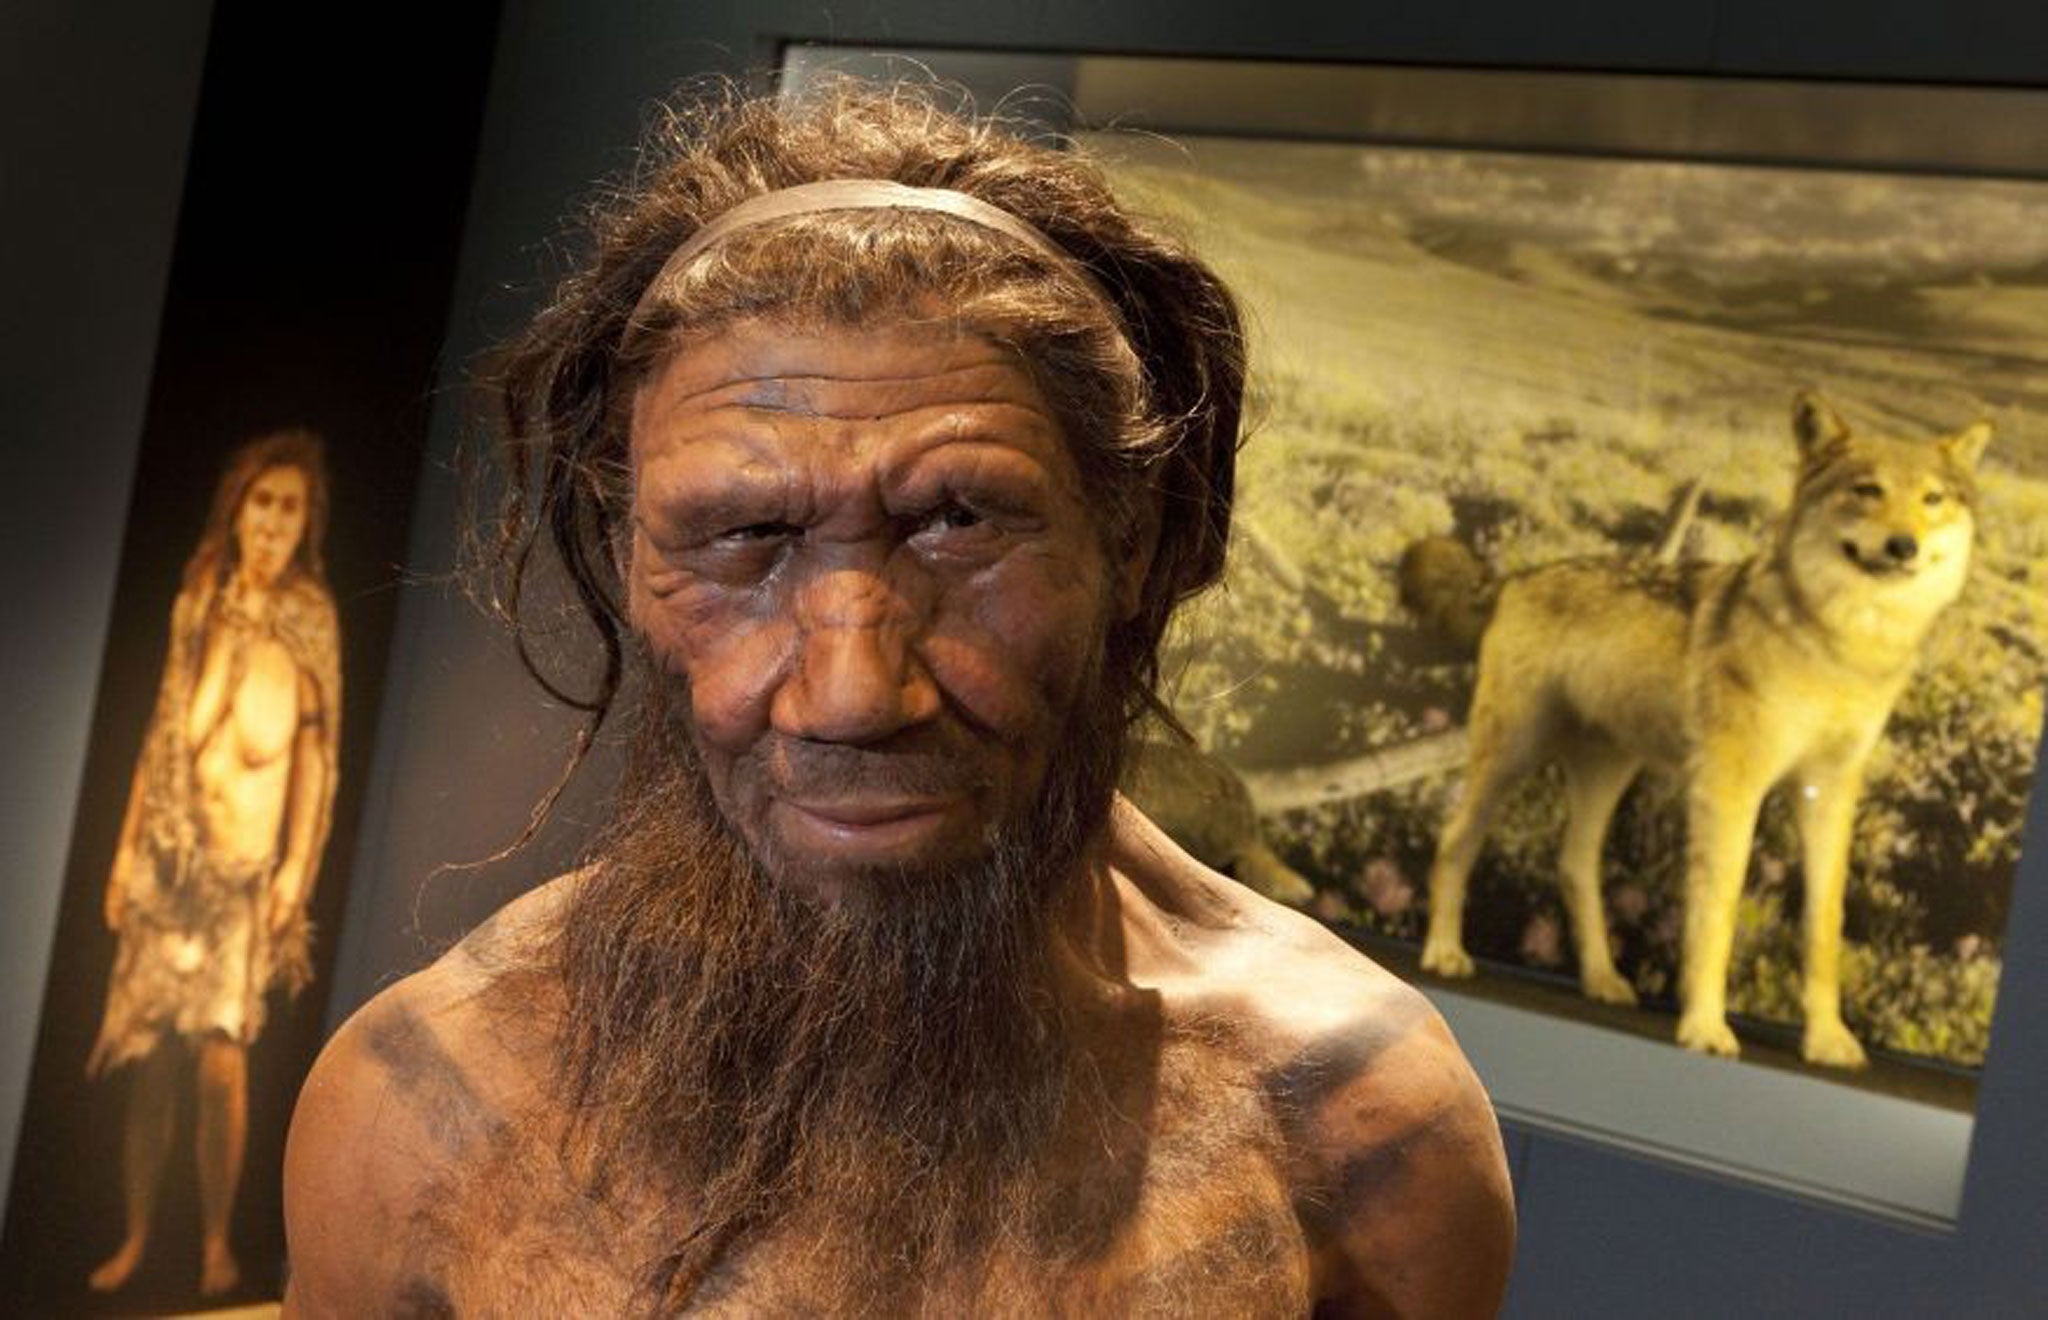 A Neanderthal model on display at the Natural History Museum